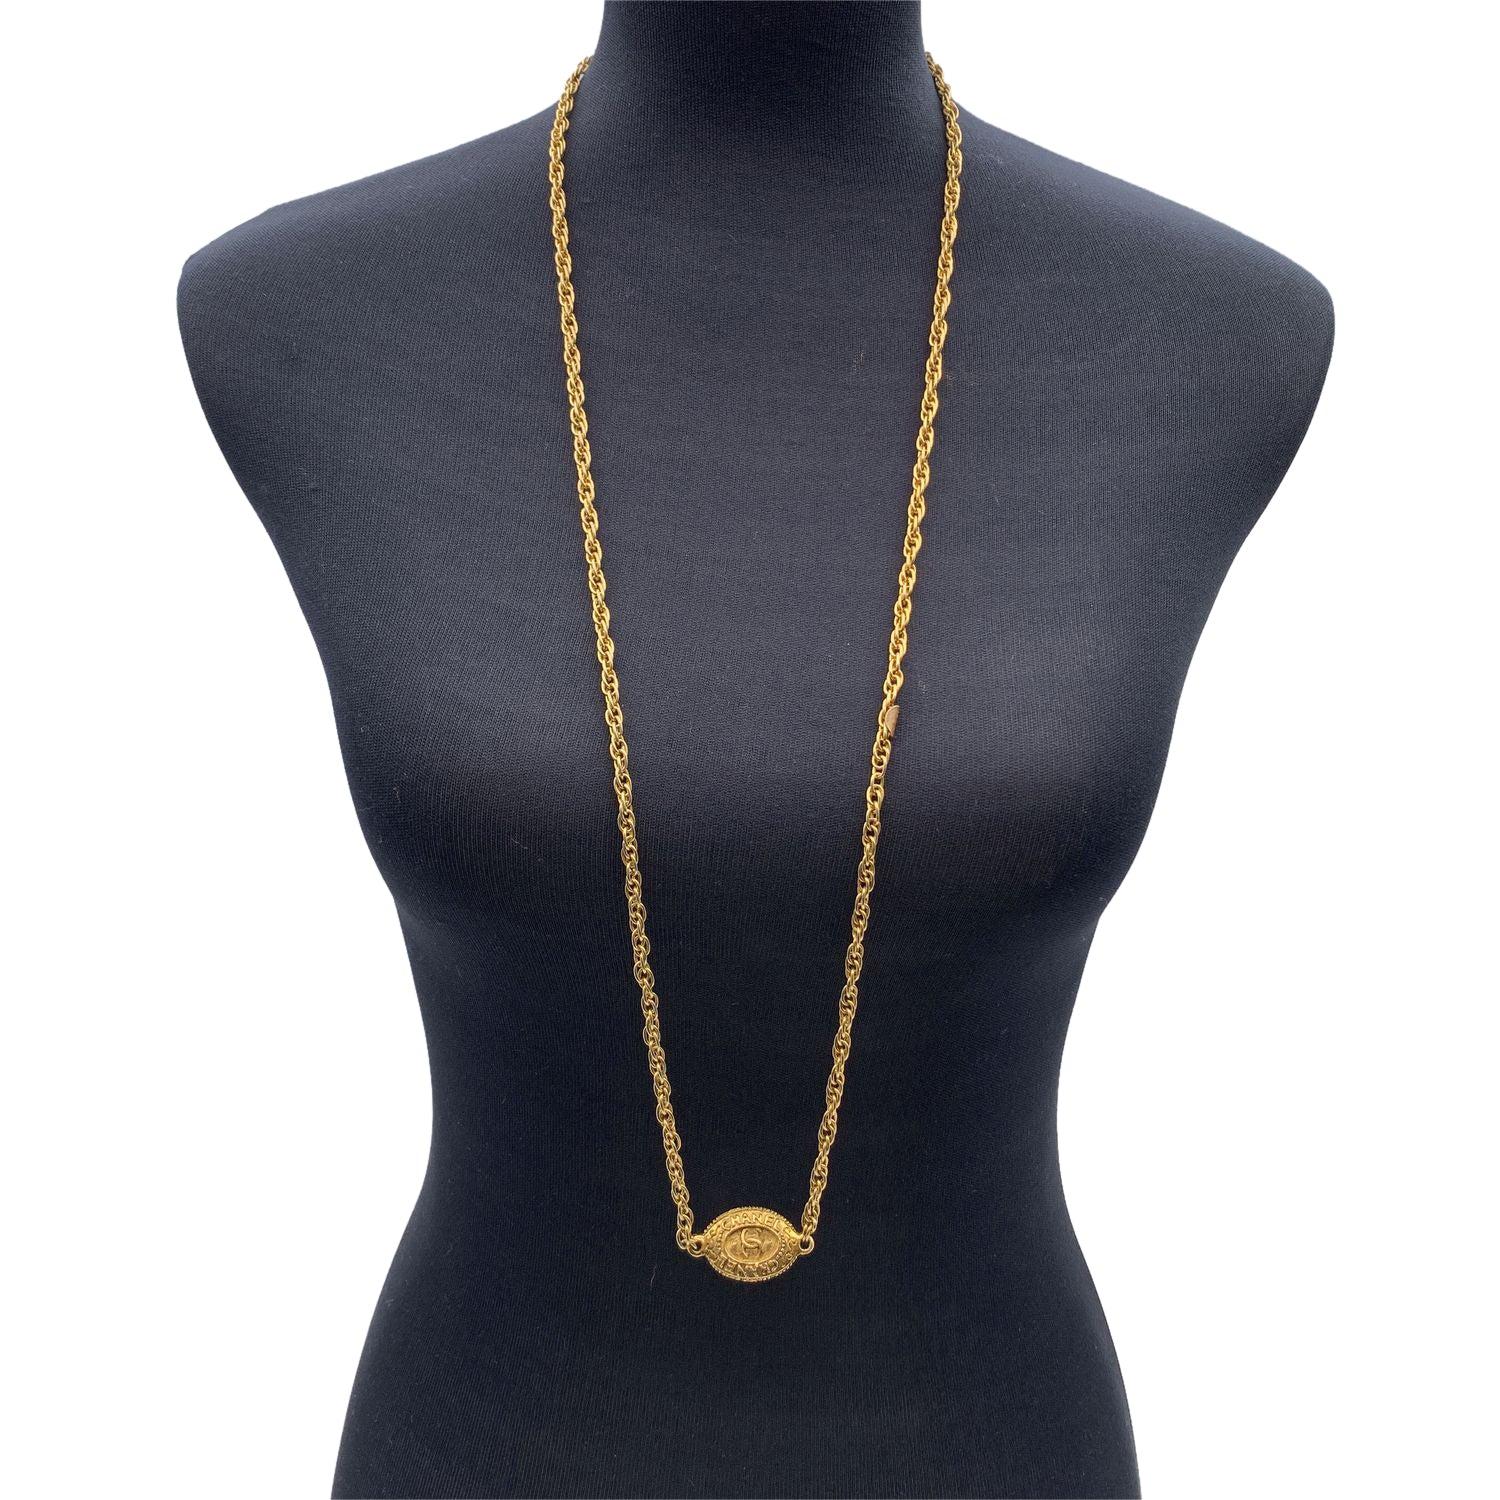 Chanel Vintage 1970s Gold Metal Long Oval Medallion Necklace In Excellent Condition For Sale In Rome, Rome